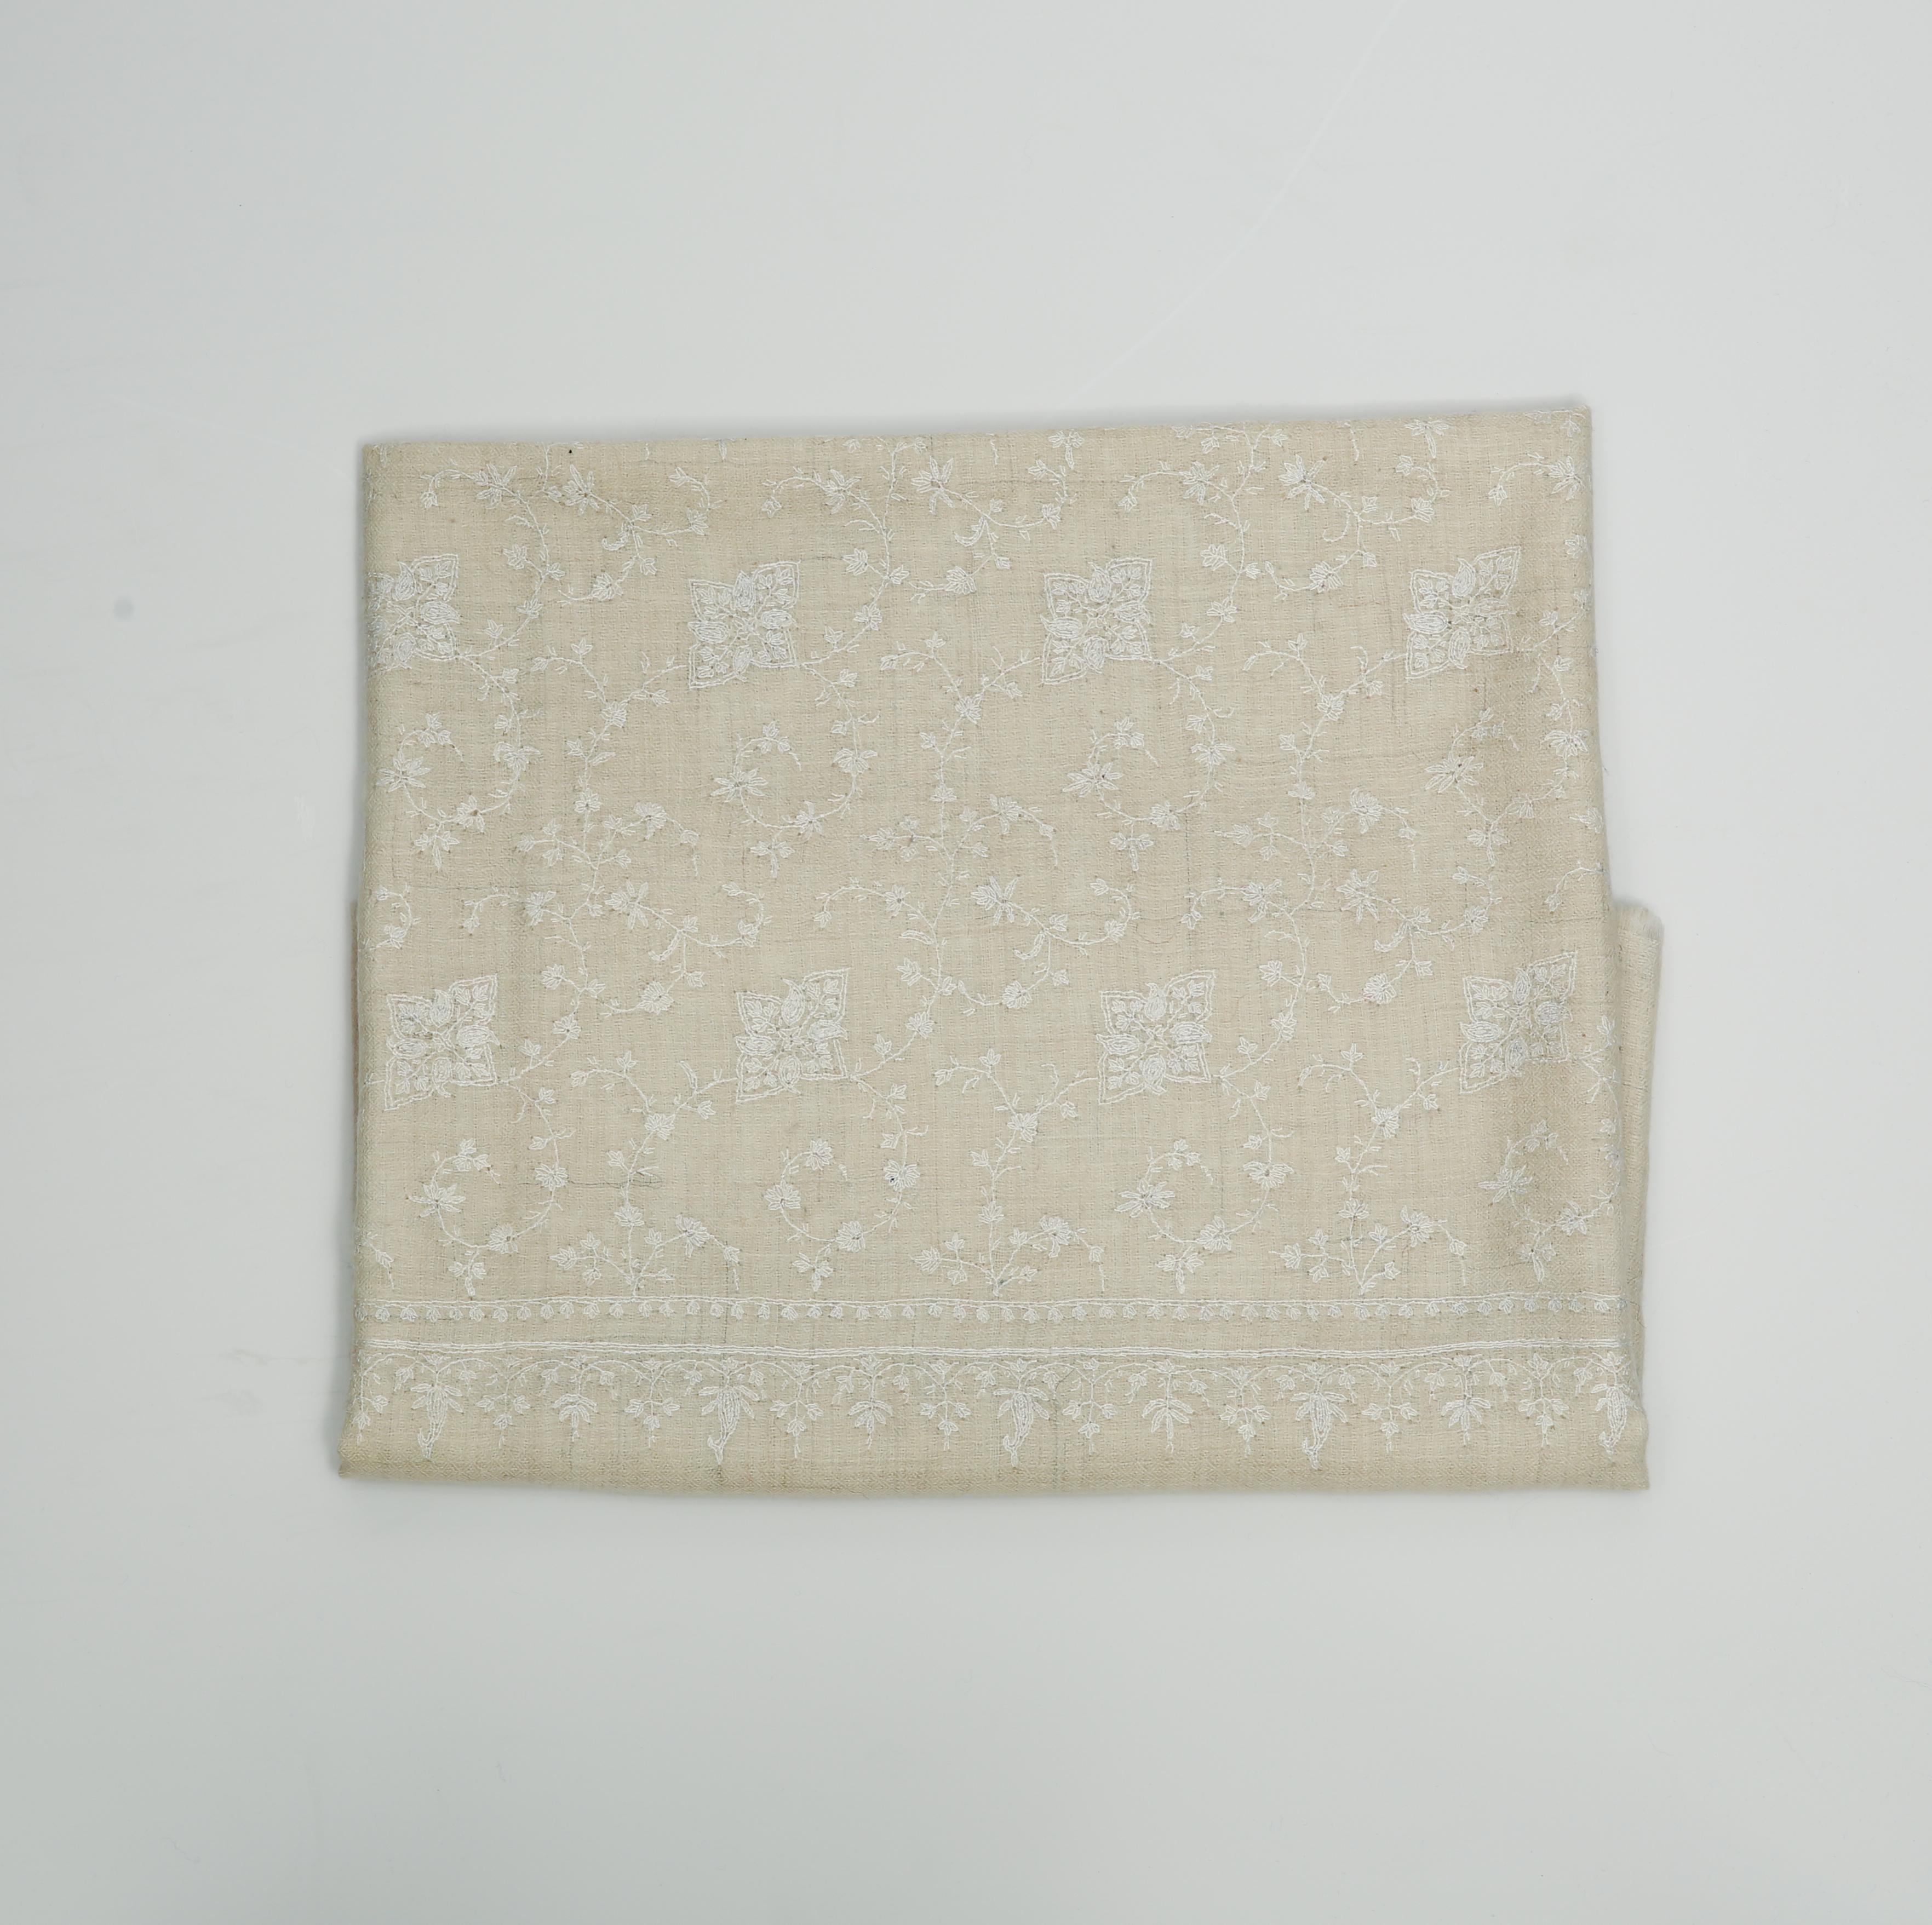 Women's or Men's Hand Embroidered 100% Cashmere Shawl in Ivory Cream & White Made in Kashmir